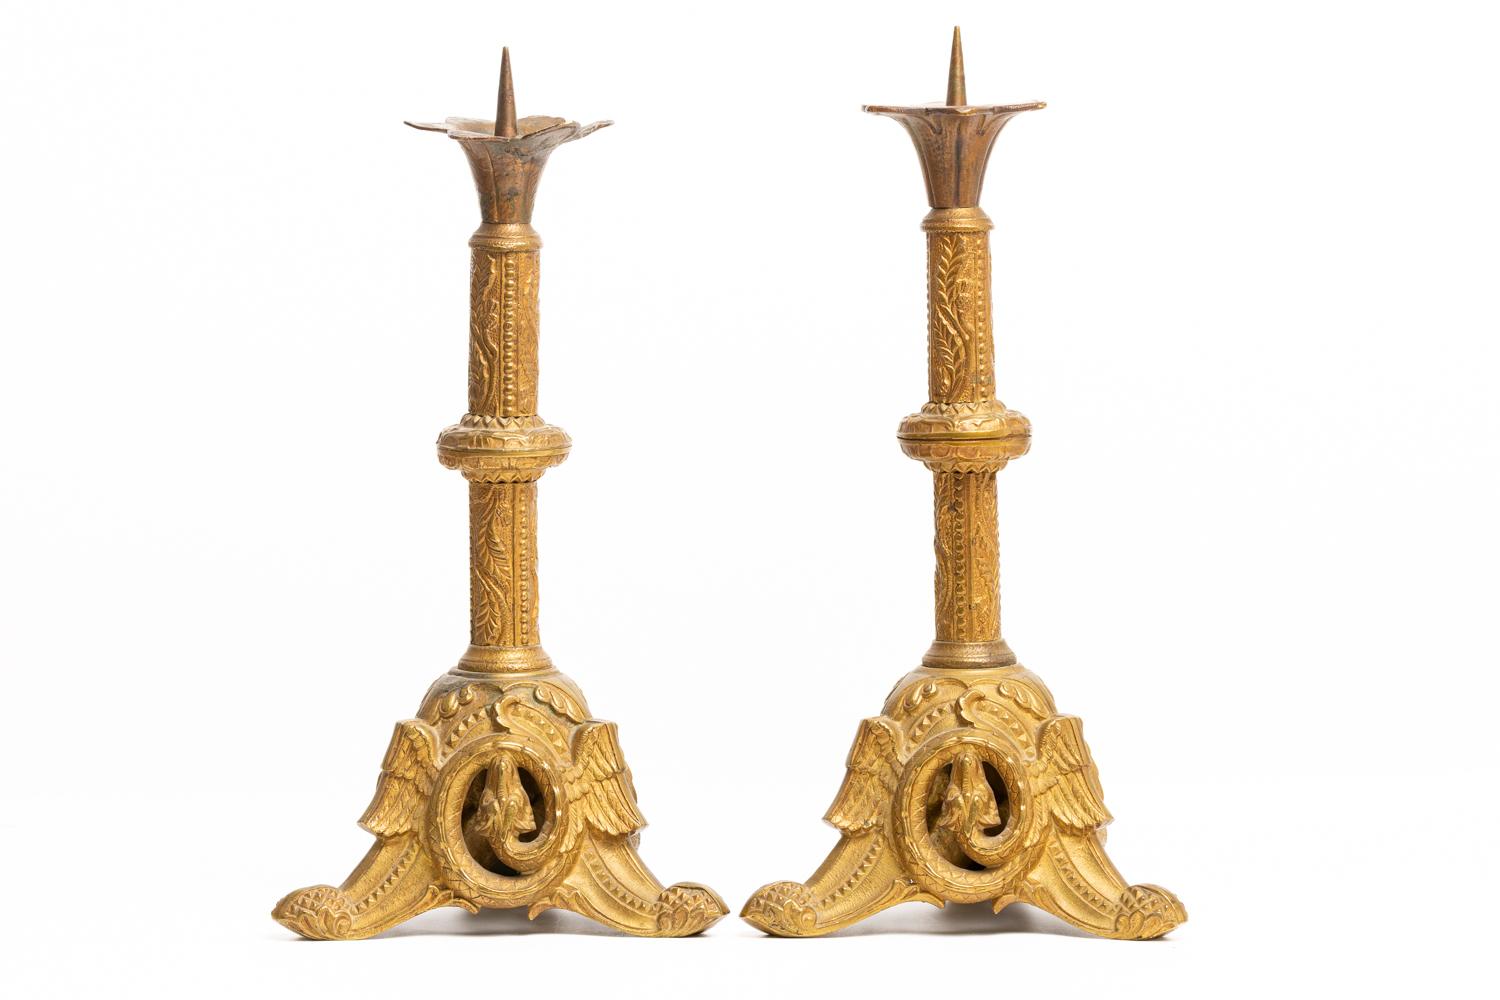 Rare and very ornate pair of French 19th century gilt brass altar candlesticks. The candlesticks are beautifully decorated with foliage and geometric design. Triangle base with winged dragons on each side of candlestick. Prickets would be perfect